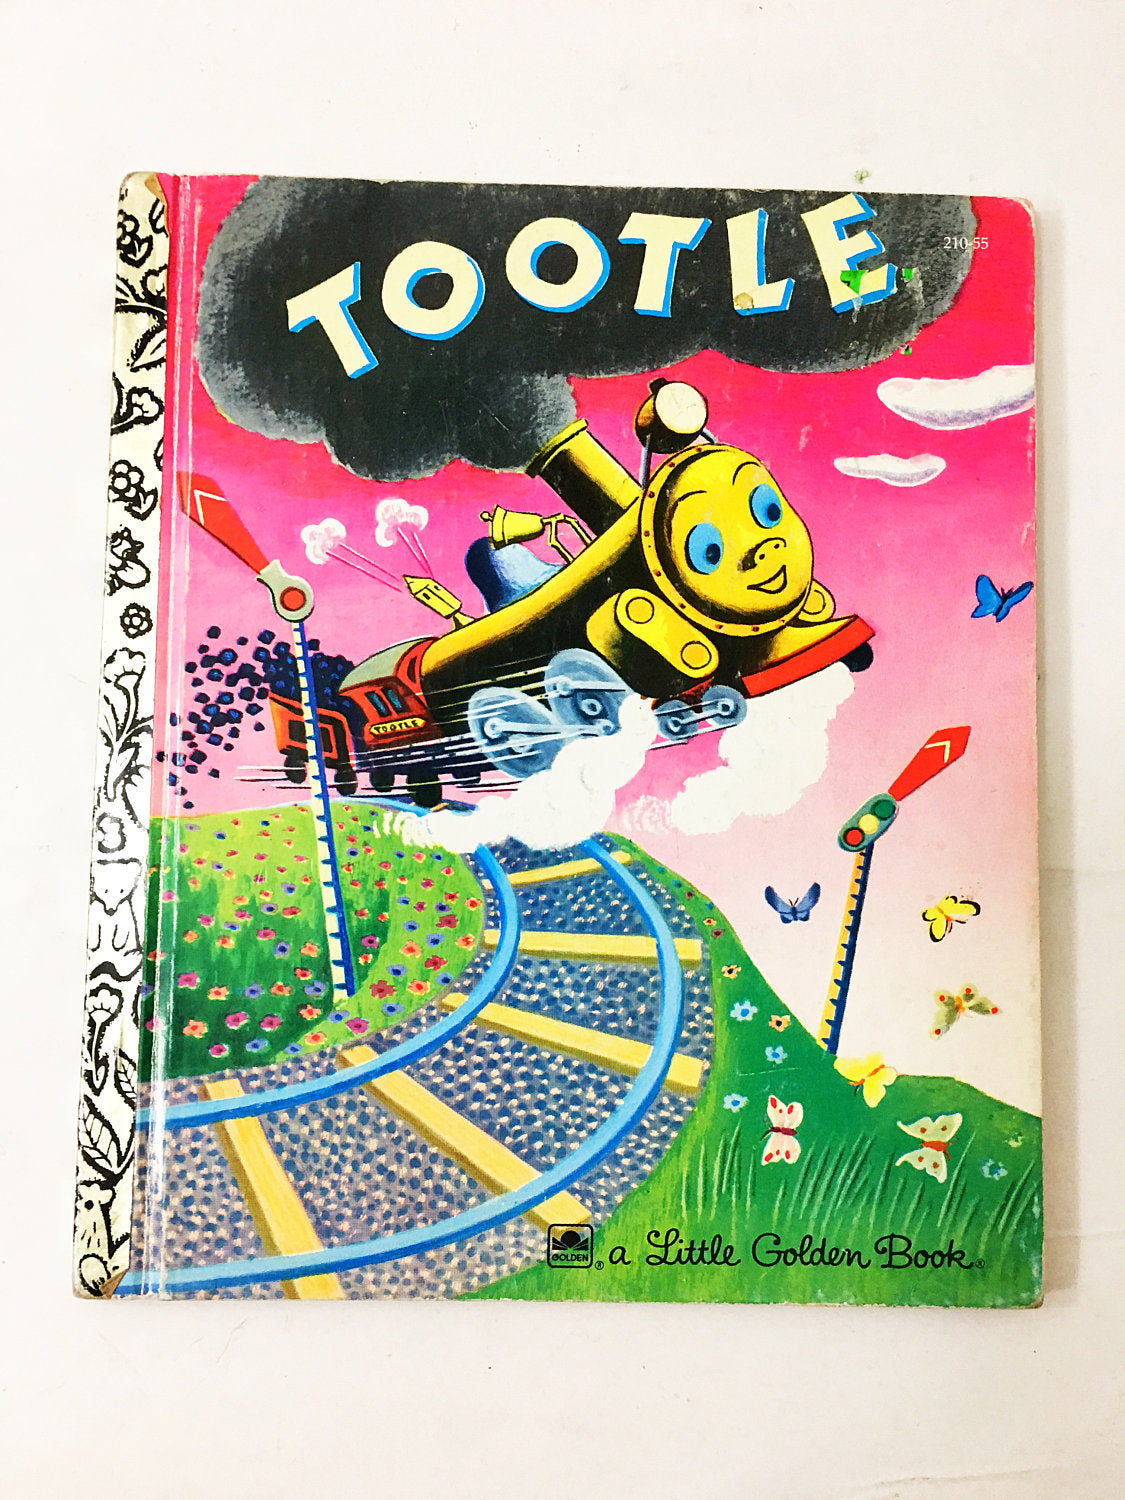 Tootle Vintage Little Golden Book illustrated by Tibor Gergely. Gertrude Crampton circa 1992. Sweet children's train story.